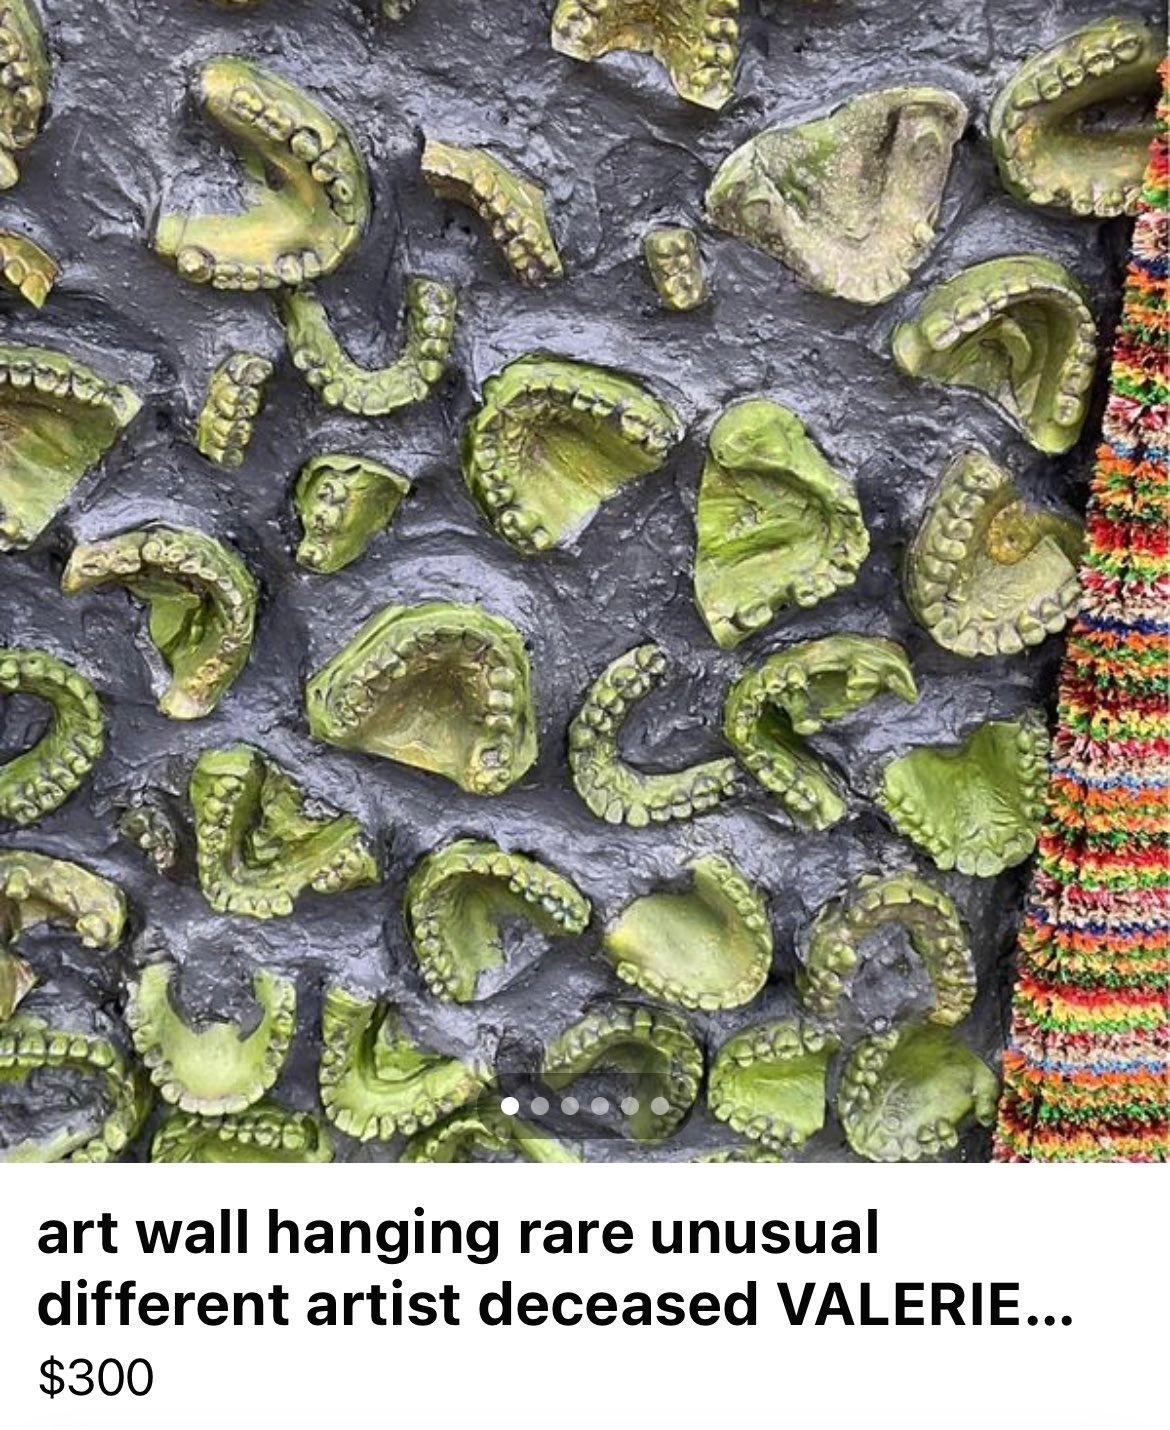 dentures used in wall art